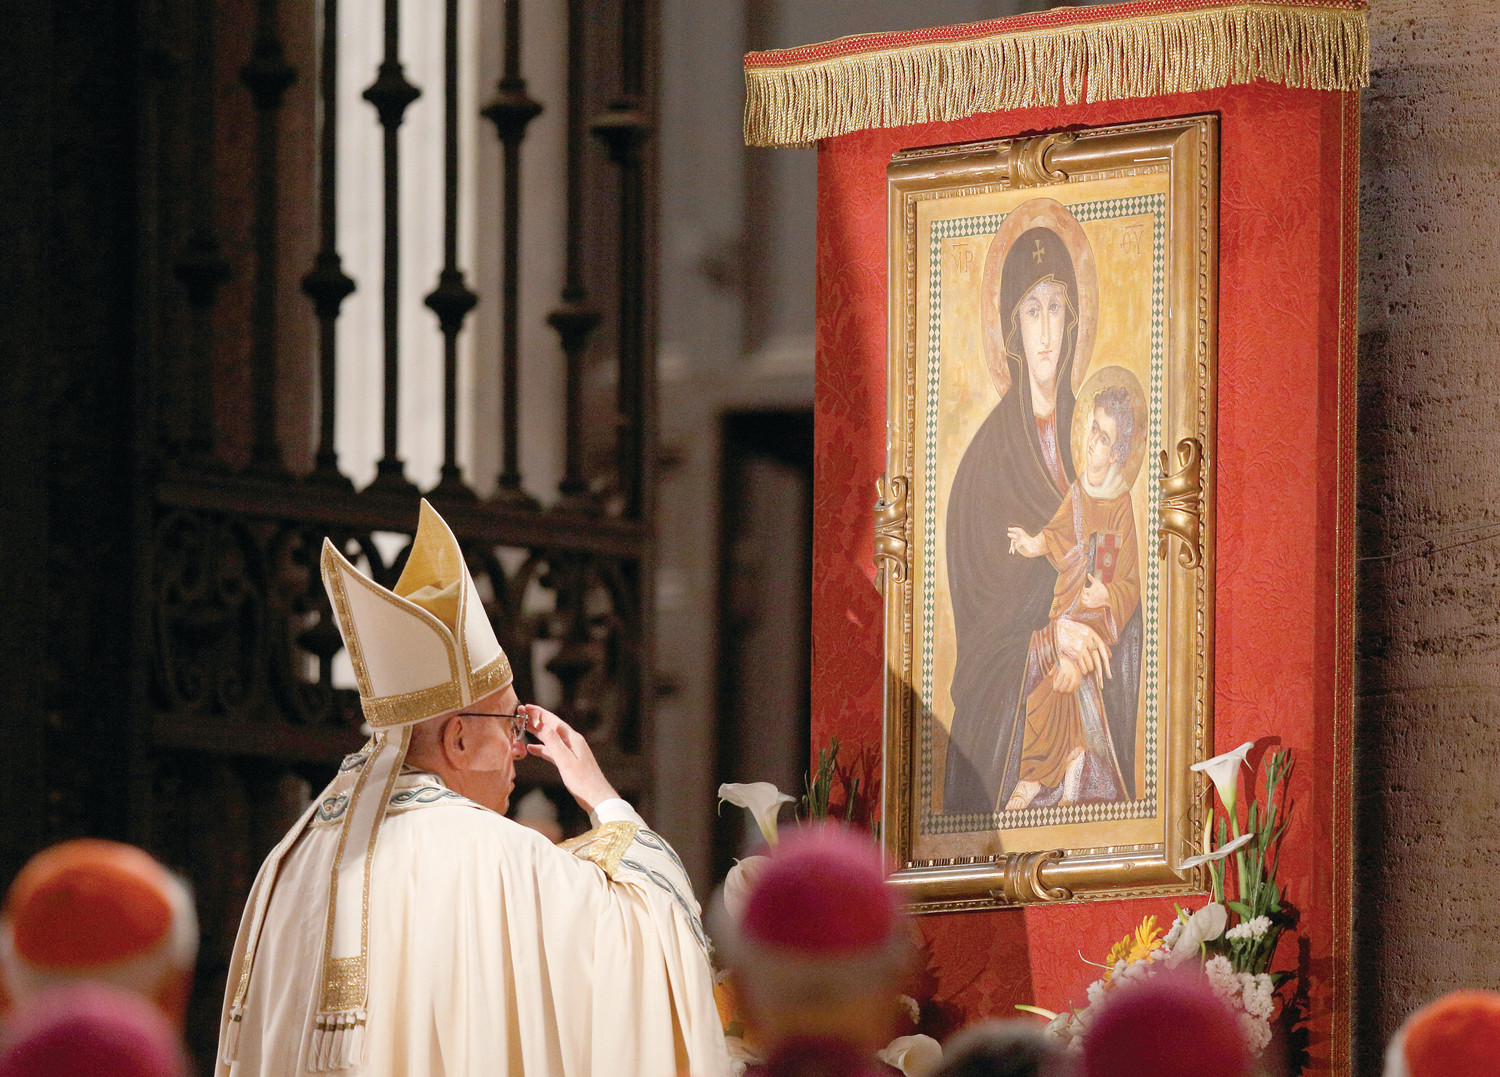 Pope Francis venerates a Marian image outside the Basilica of St. Mary Major in Rome in this May 26, 2016, file photo. The pope has instituted a new Marian feast honoring Mary as mother of the church. It will be celebrated every year on the Monday after Pentecost.